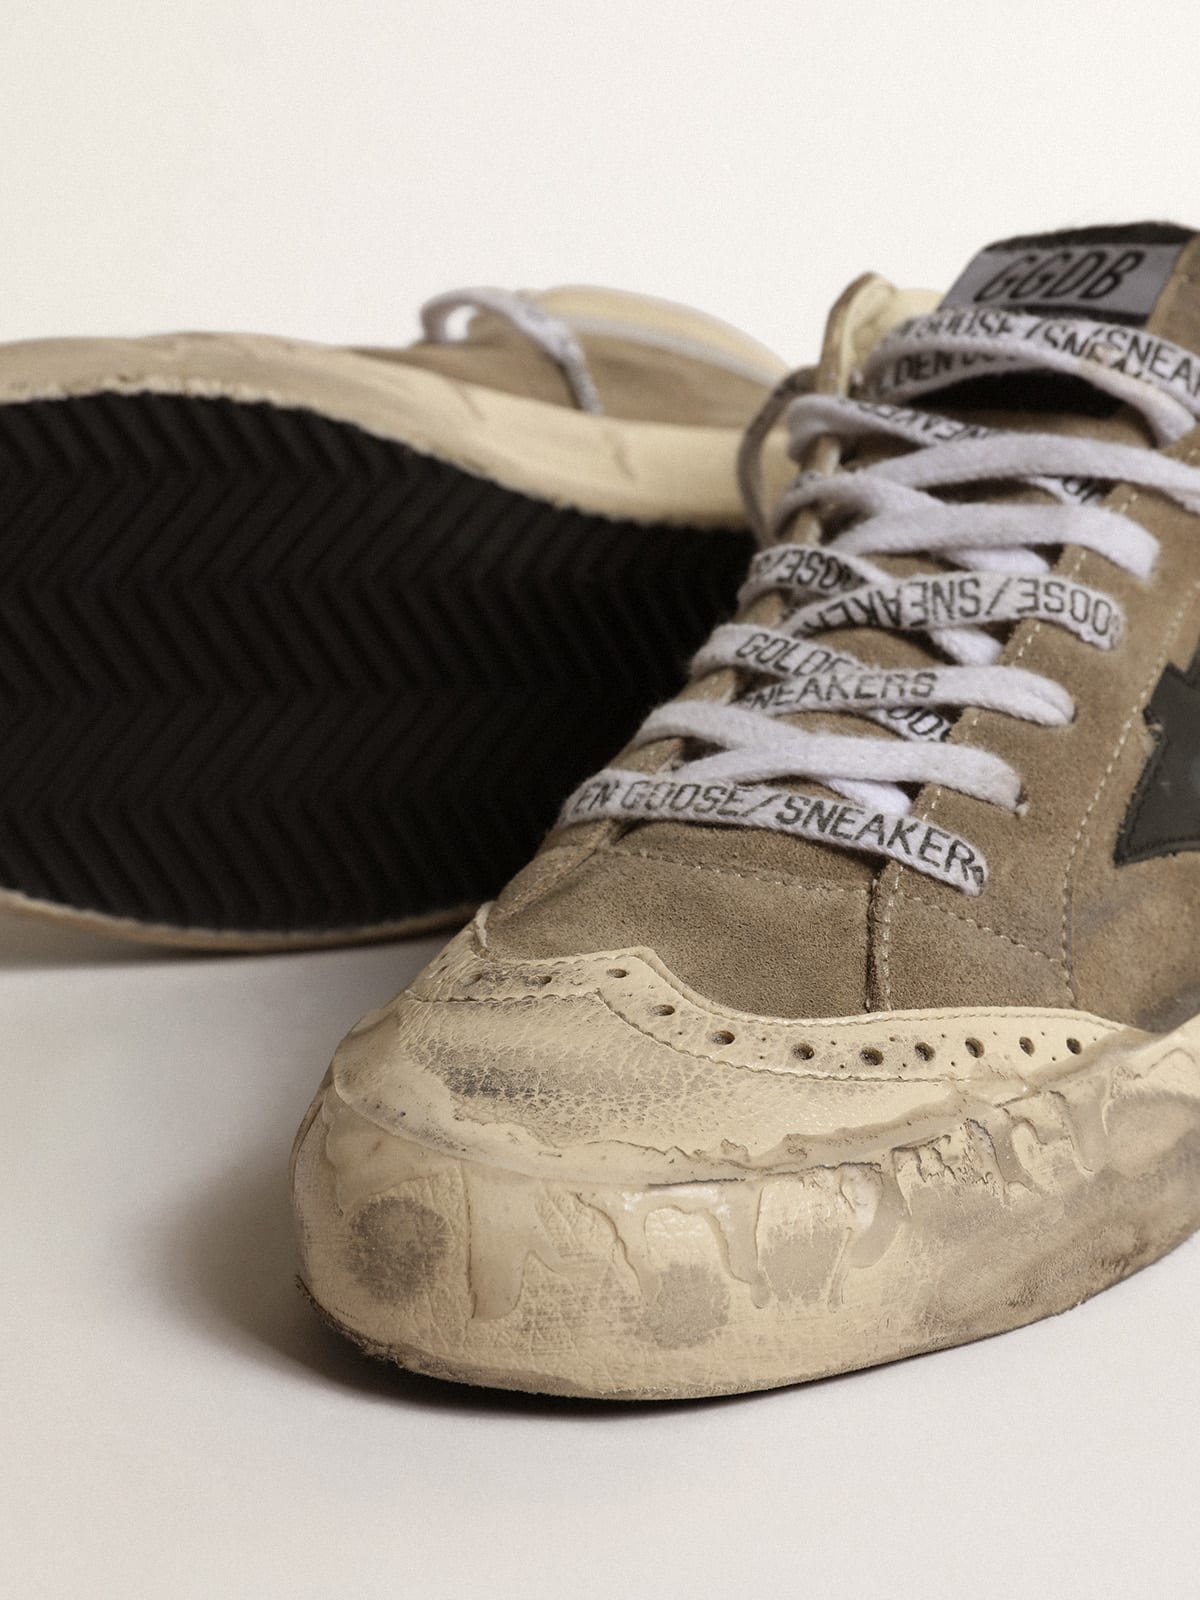 Golden Goose - Women’s Mid Star LAB in gray suede with black star in 